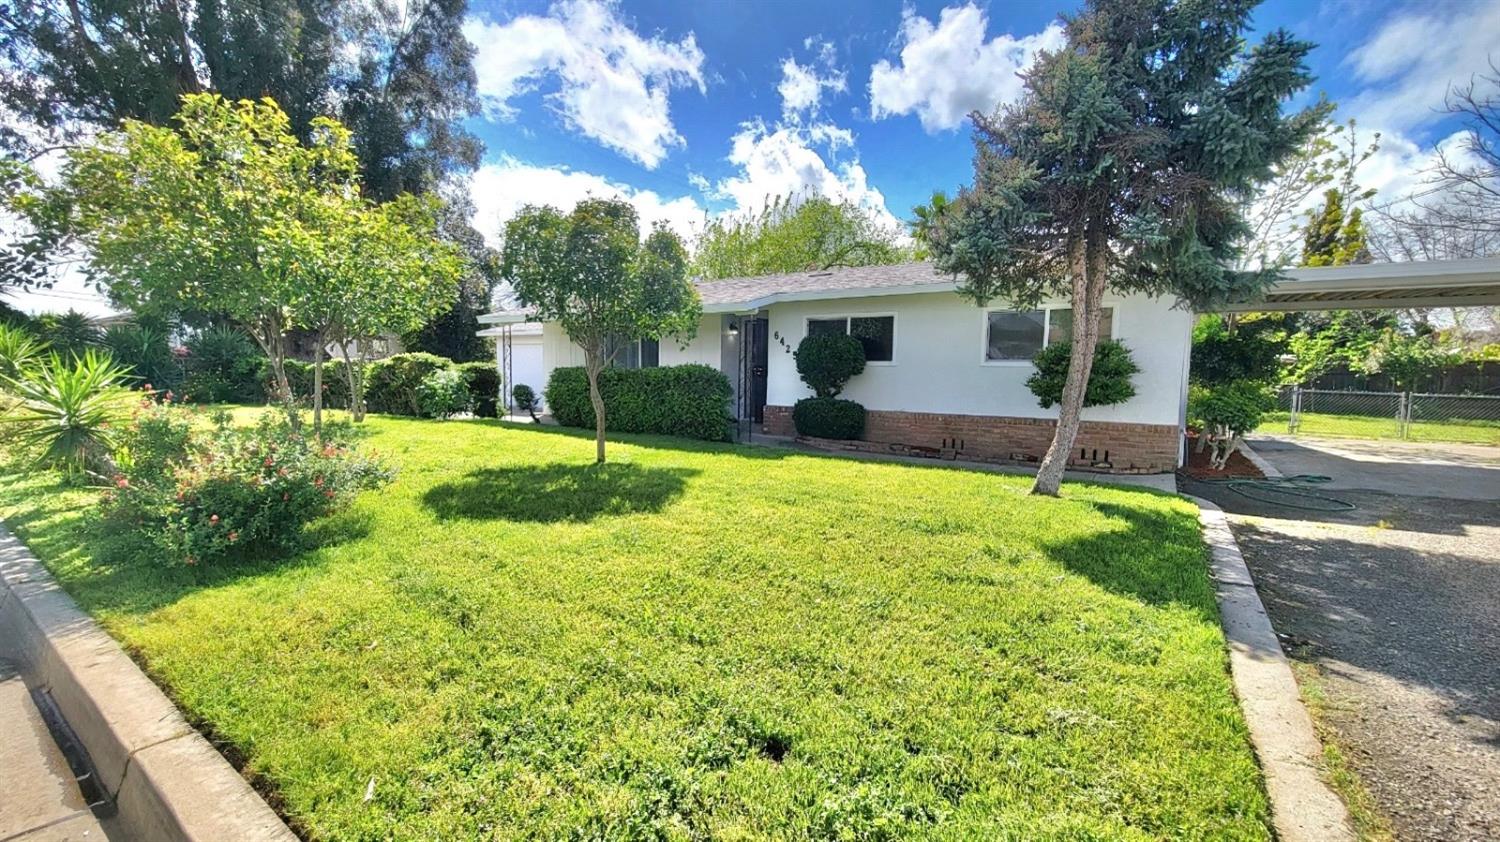 Photo of 6425 Palmer Ave in Riverbank, CA